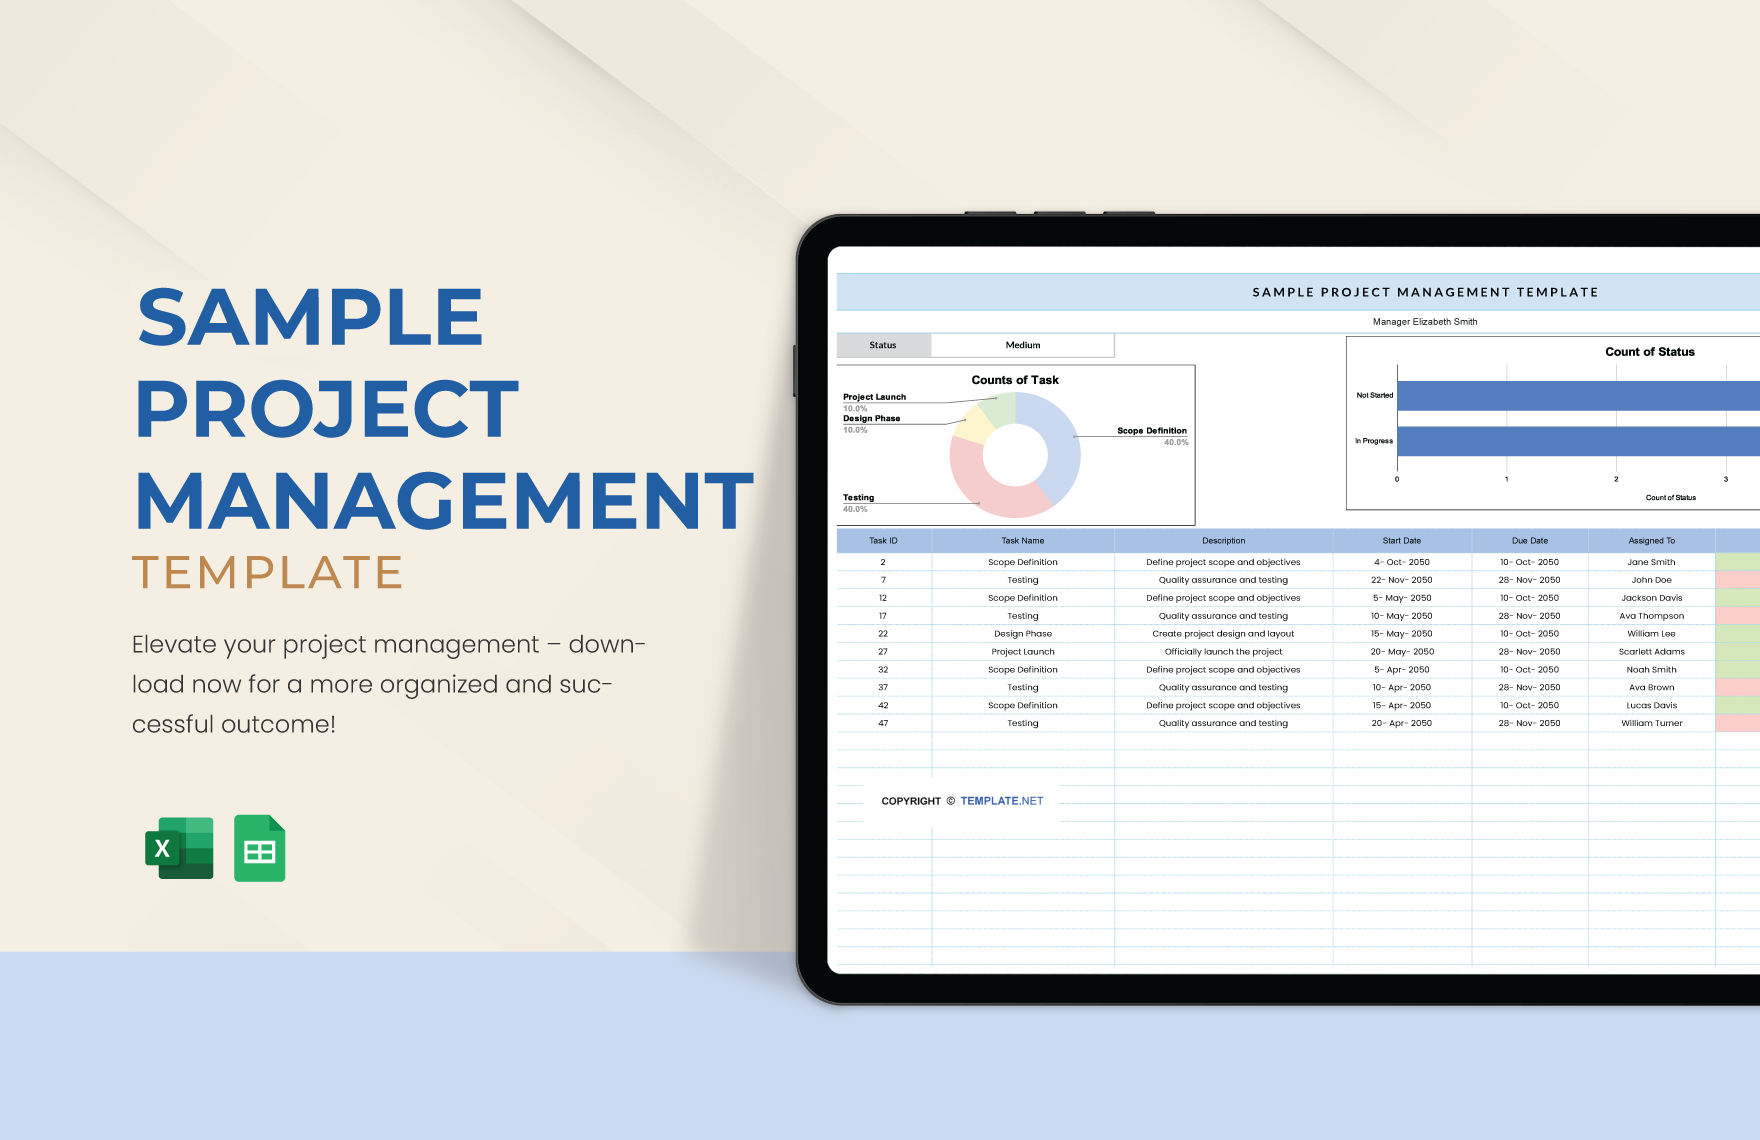 Free Sample Project Management Template